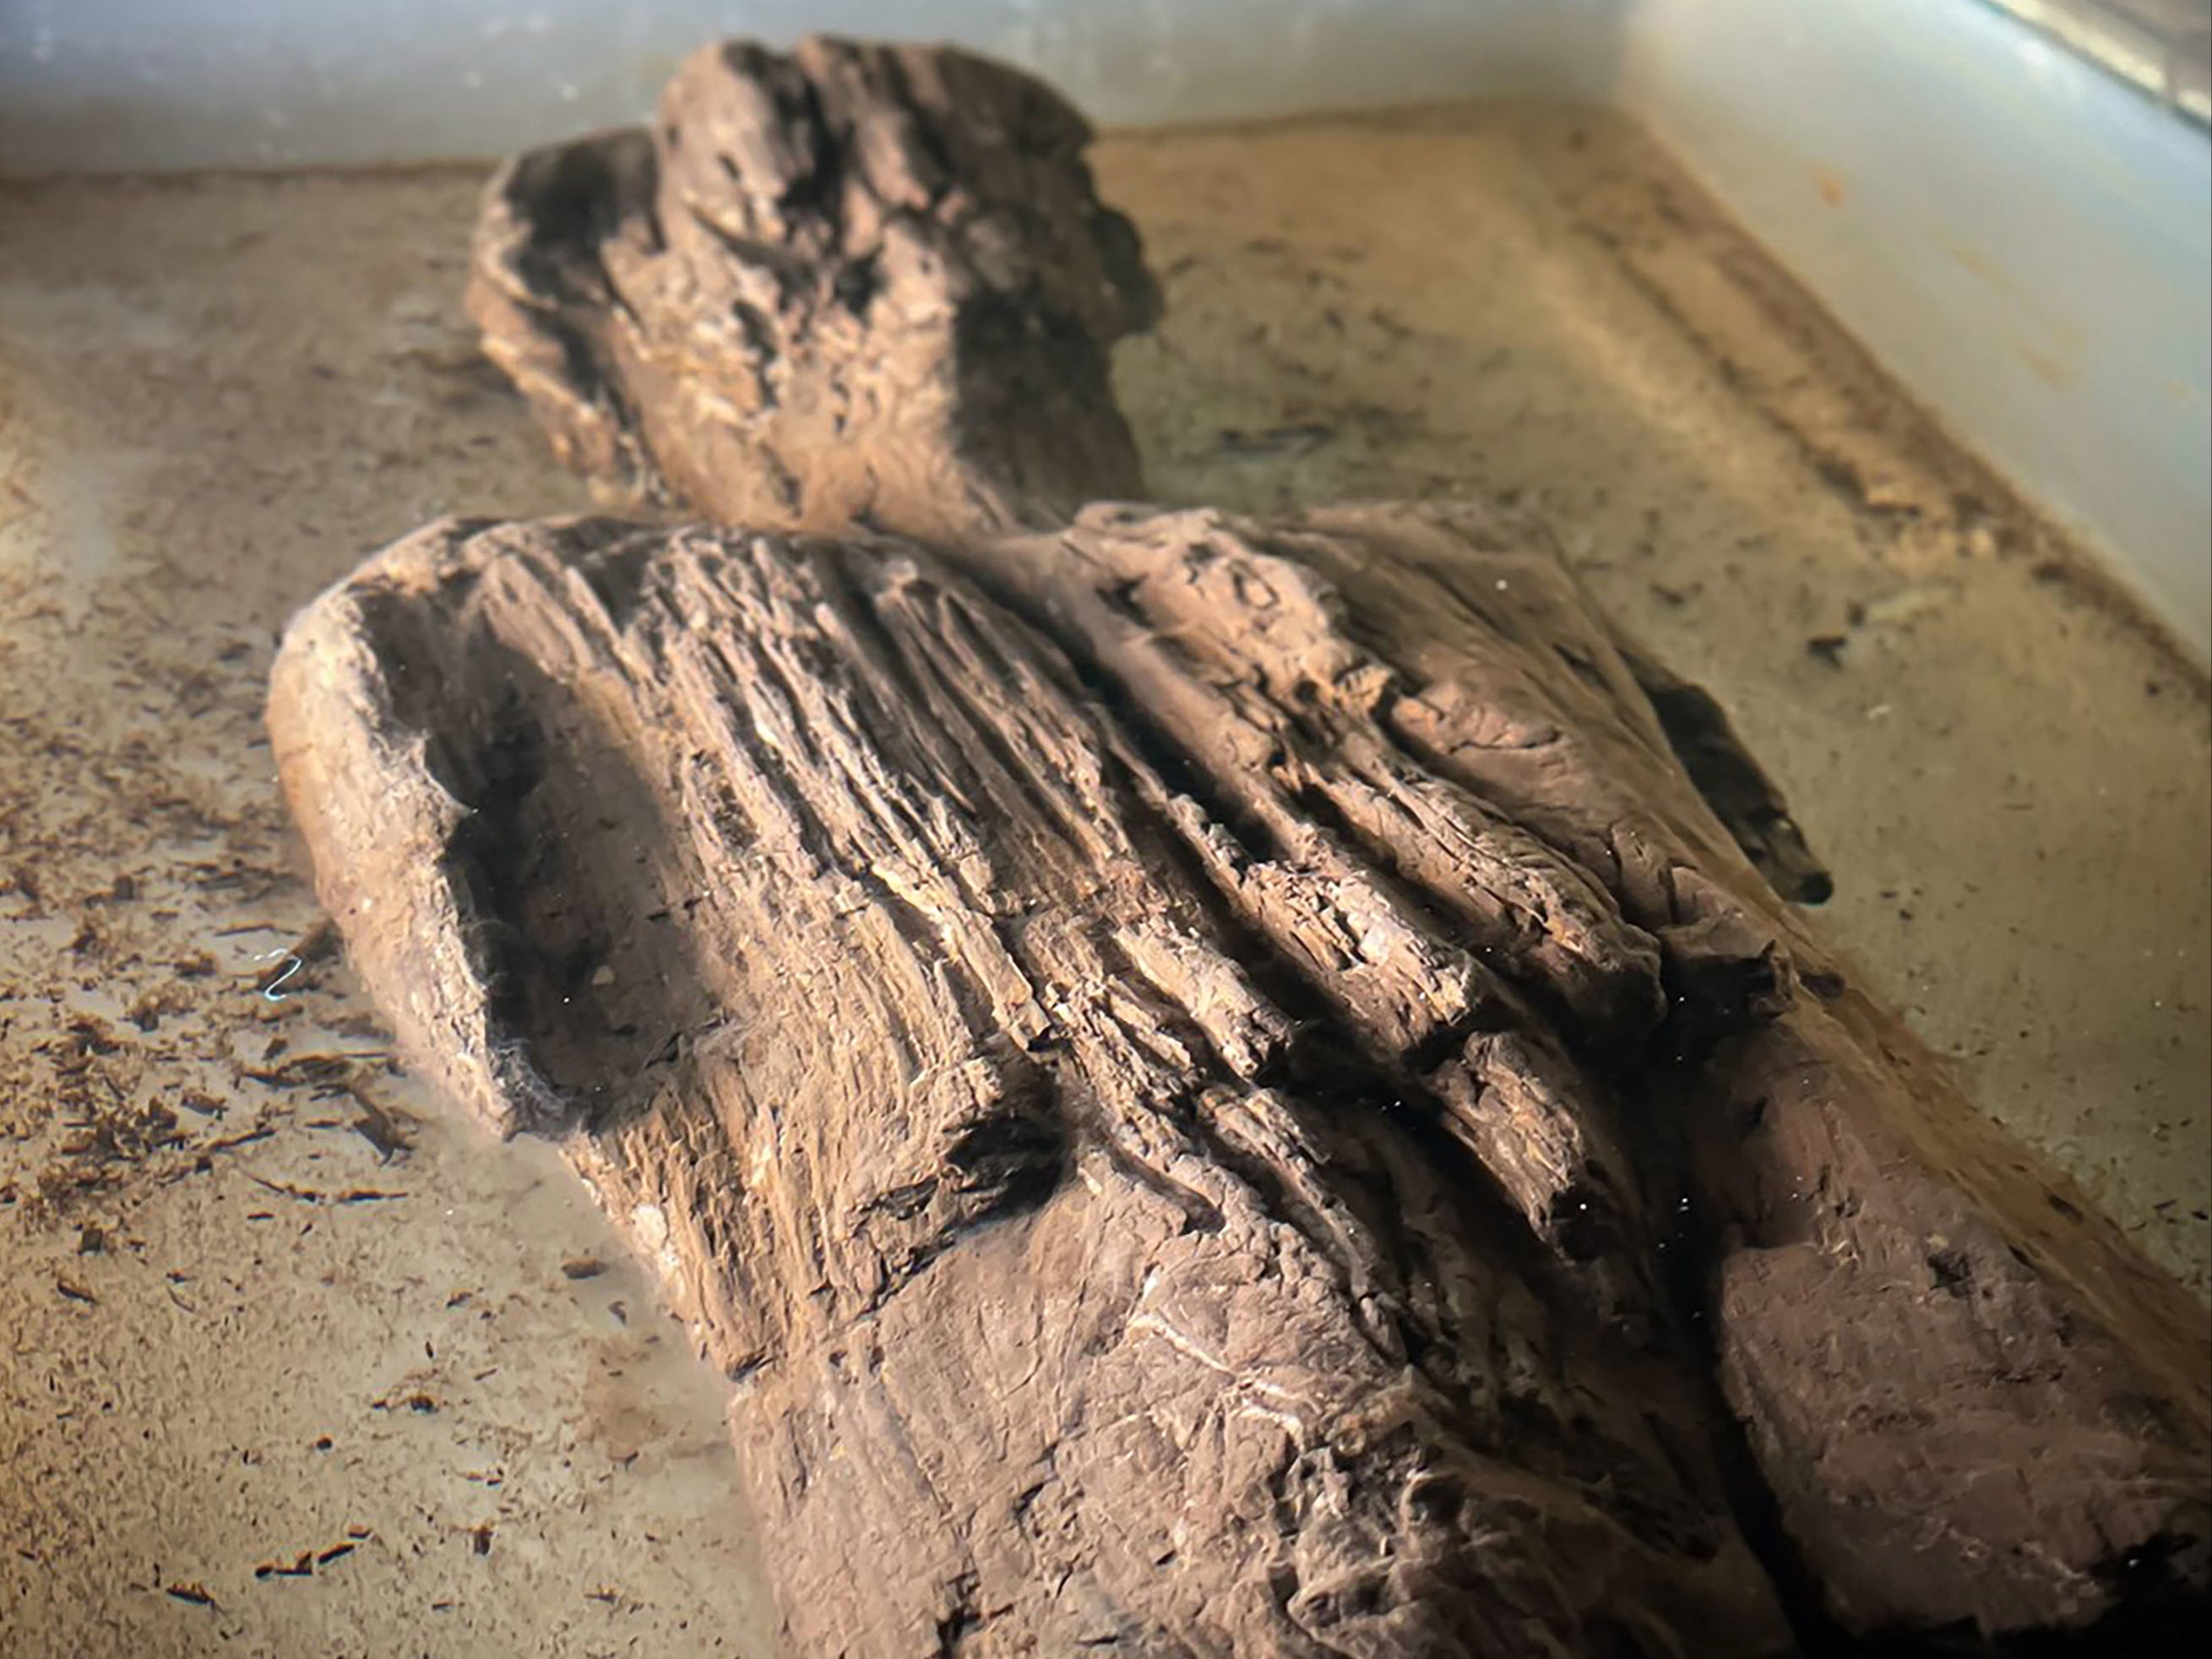 The model, cut from a single piece of wood, 67cm tall and 18cm wide, was found by archaeologists in a Roman ditch in a field in Twyford, Buckinghamshire